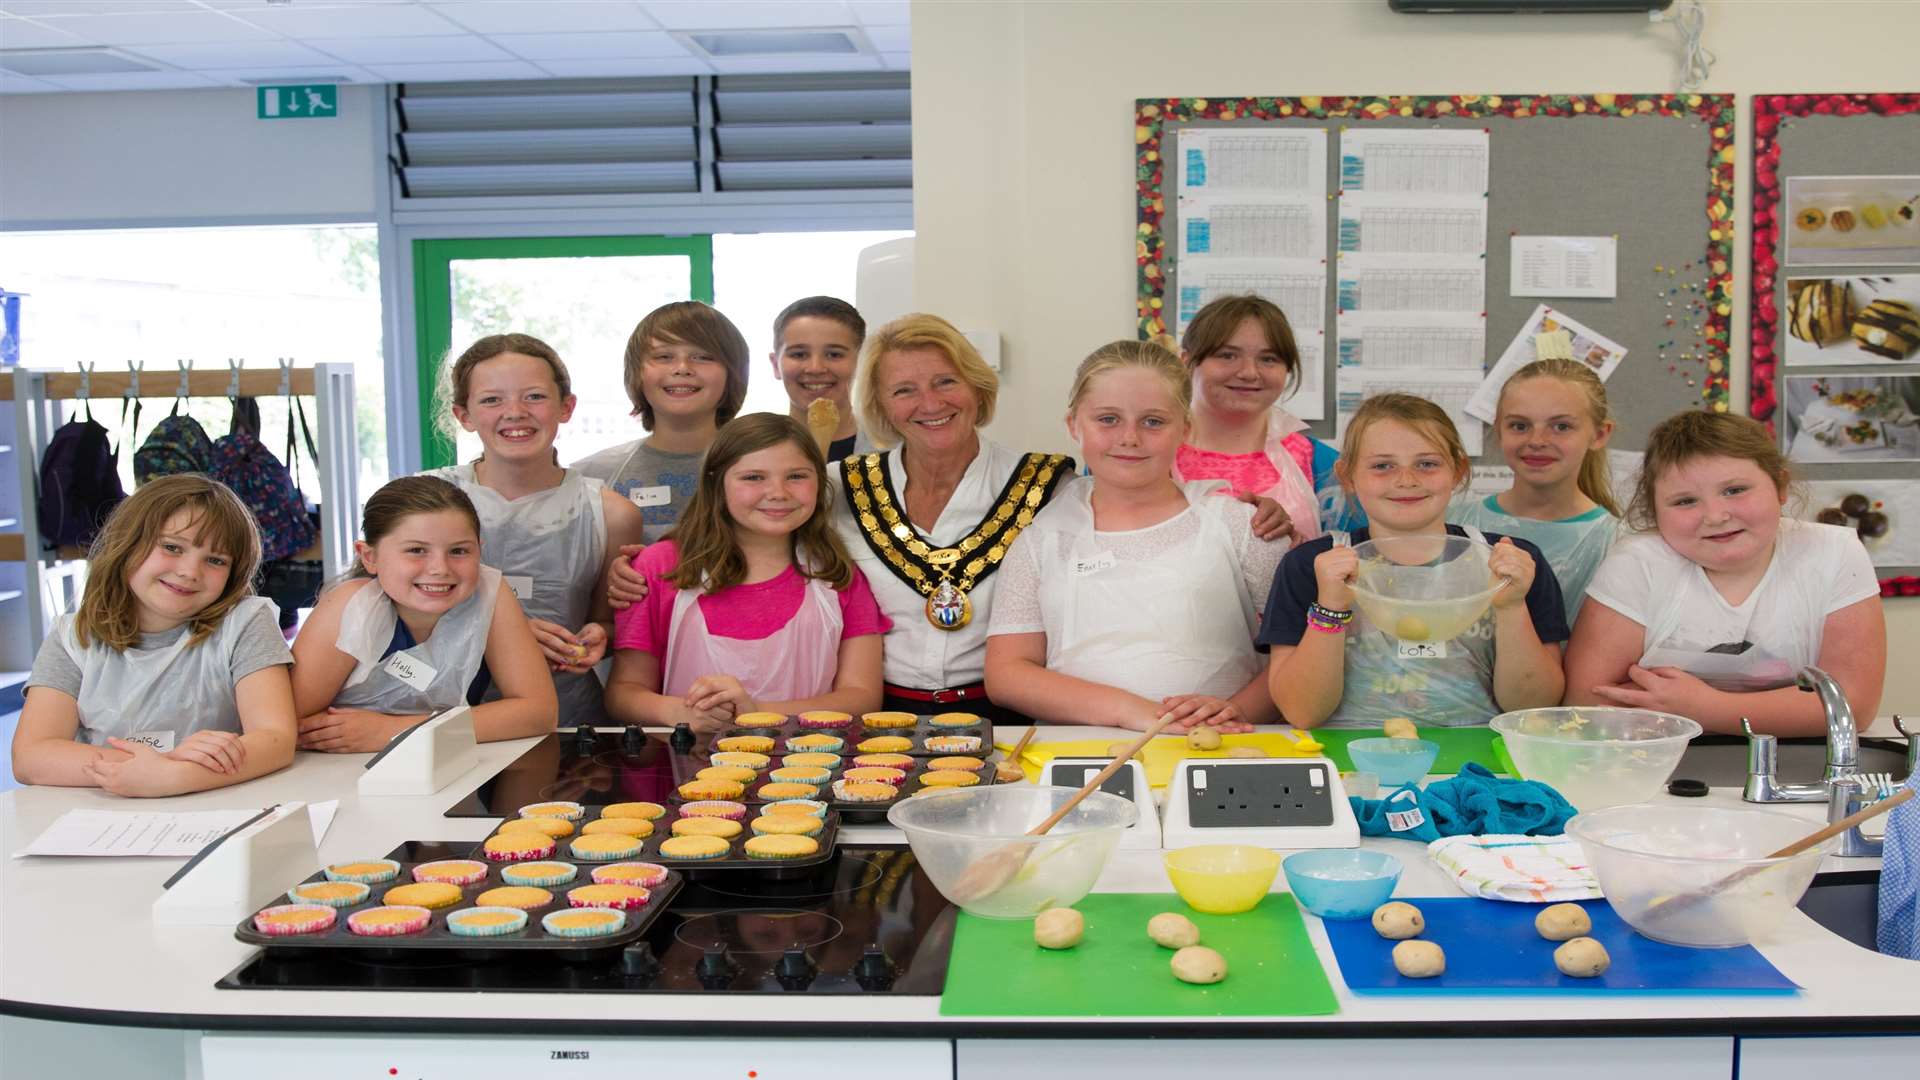 Eleven children took part in the workshop to create some cupcakes and cookies